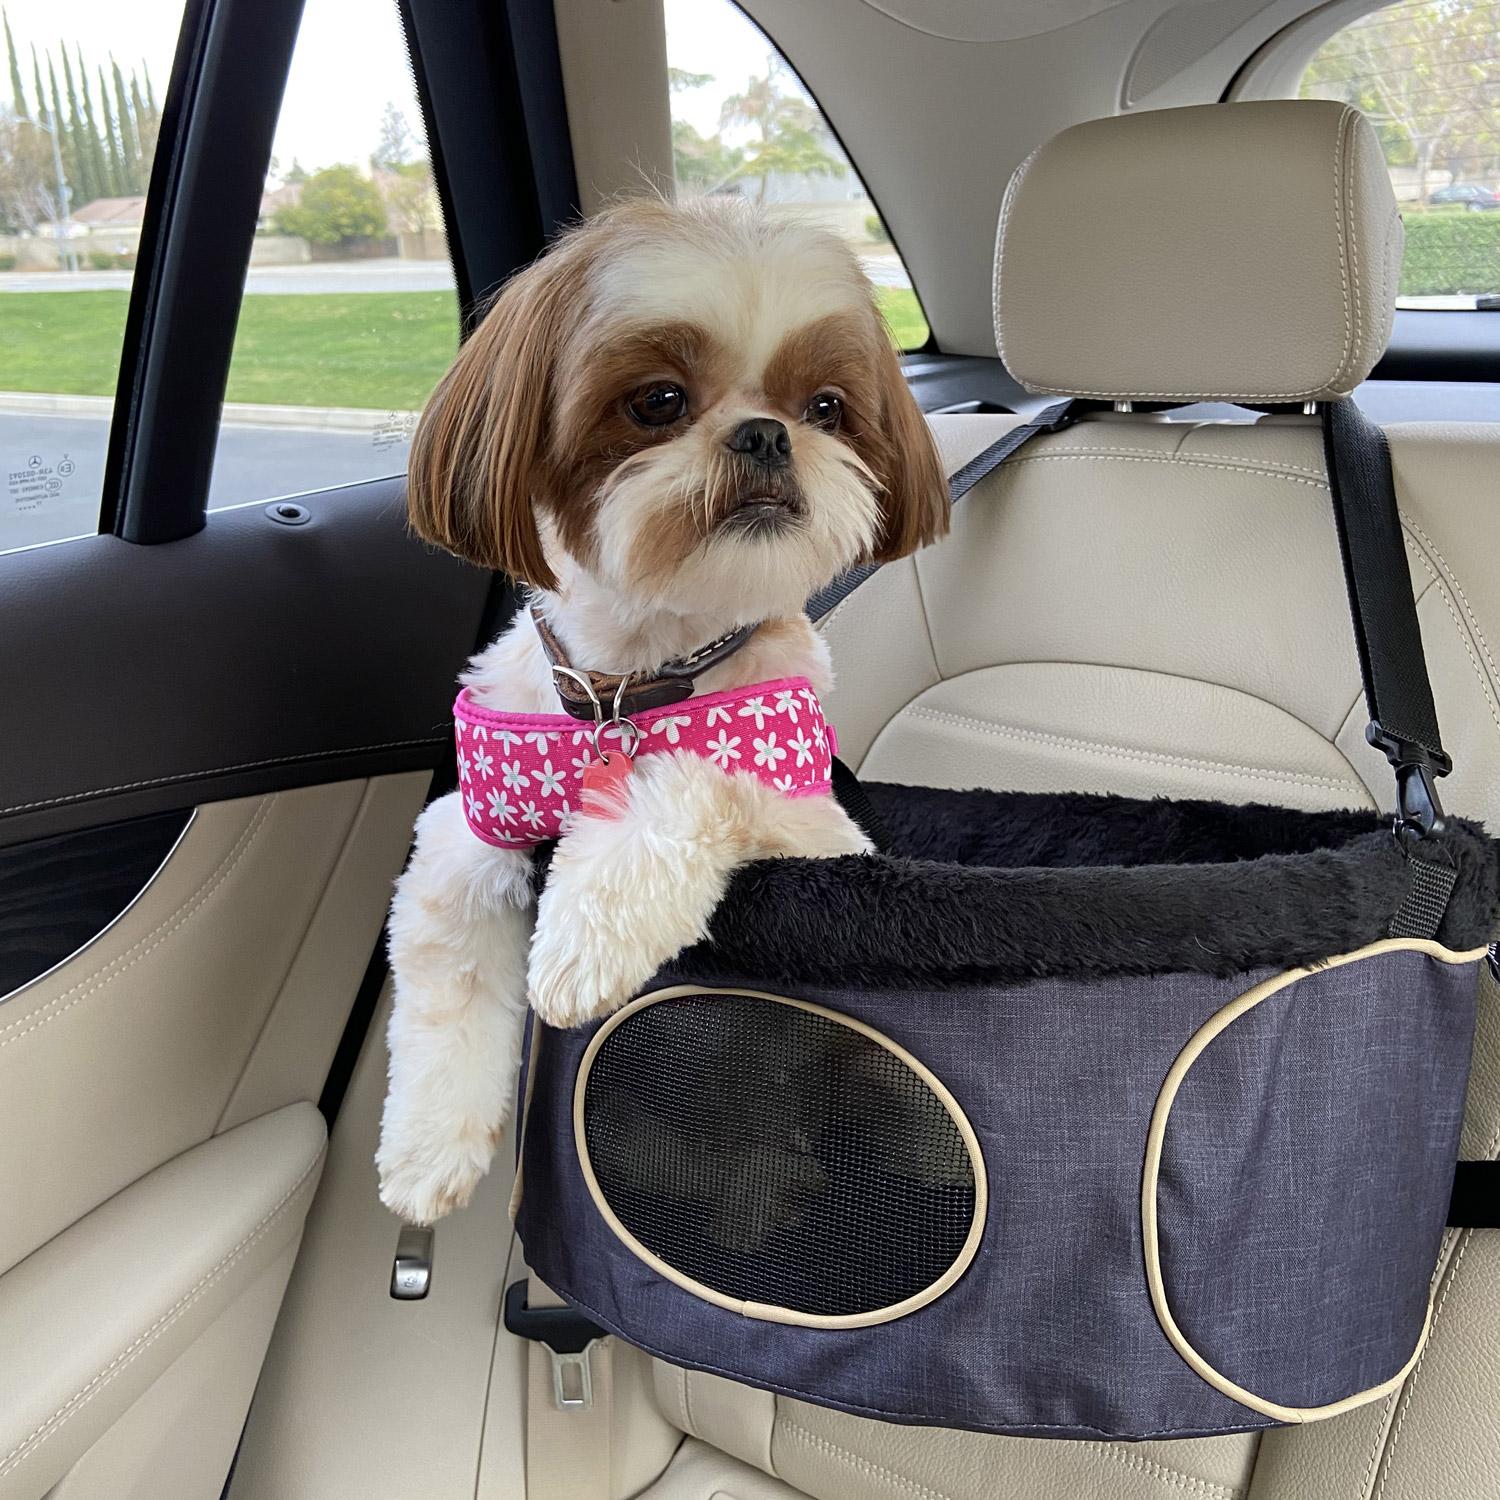 Lucinda Wasson sent us a photo of Mitsu the Shih Tzu who loves to travel!